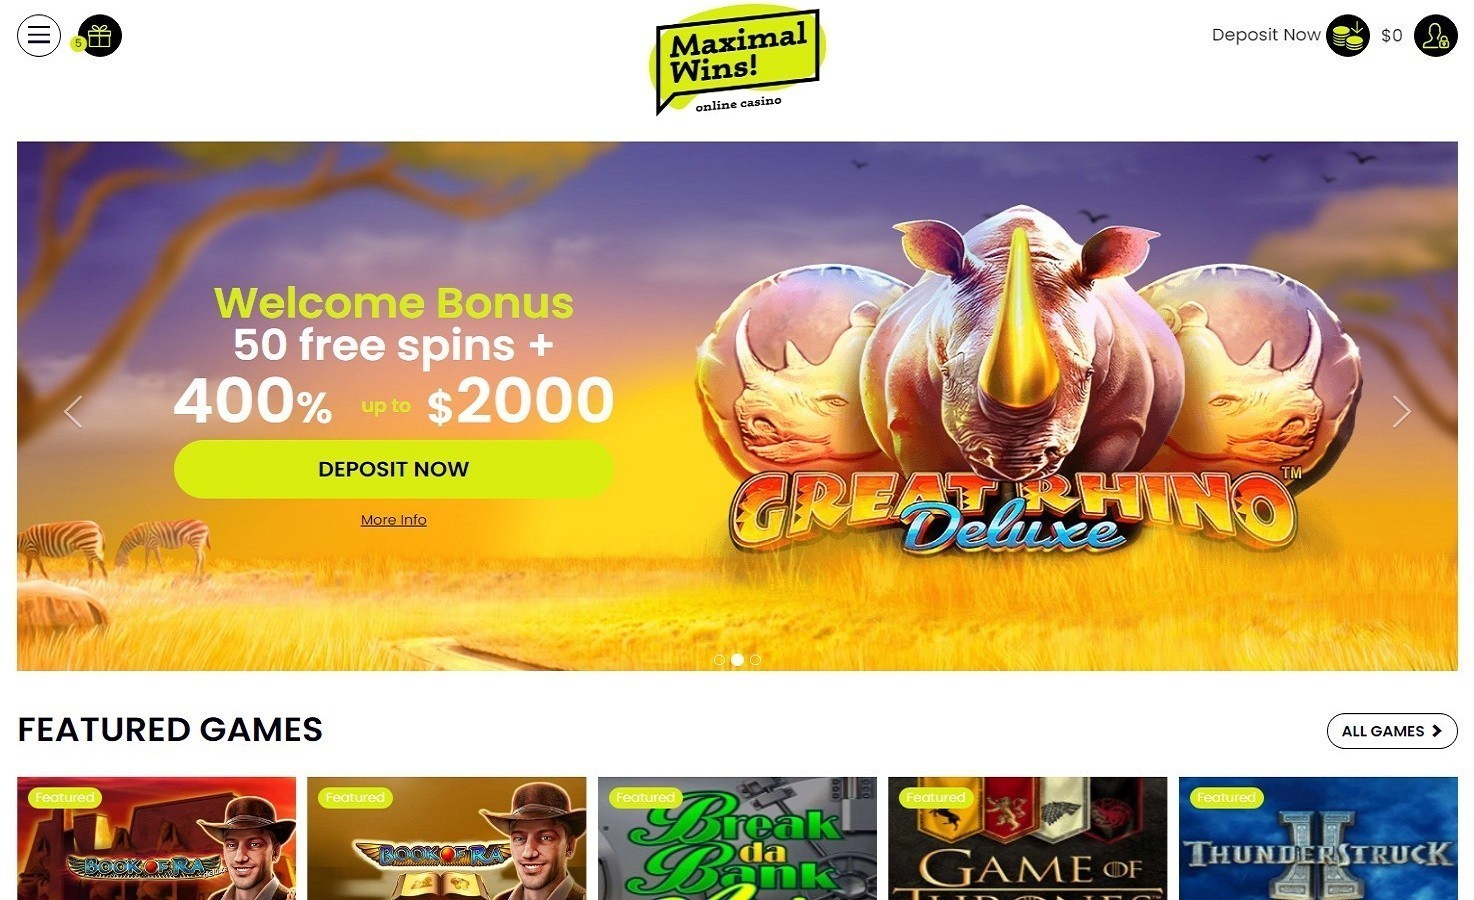 maximalWins_hottop_casino_welcome